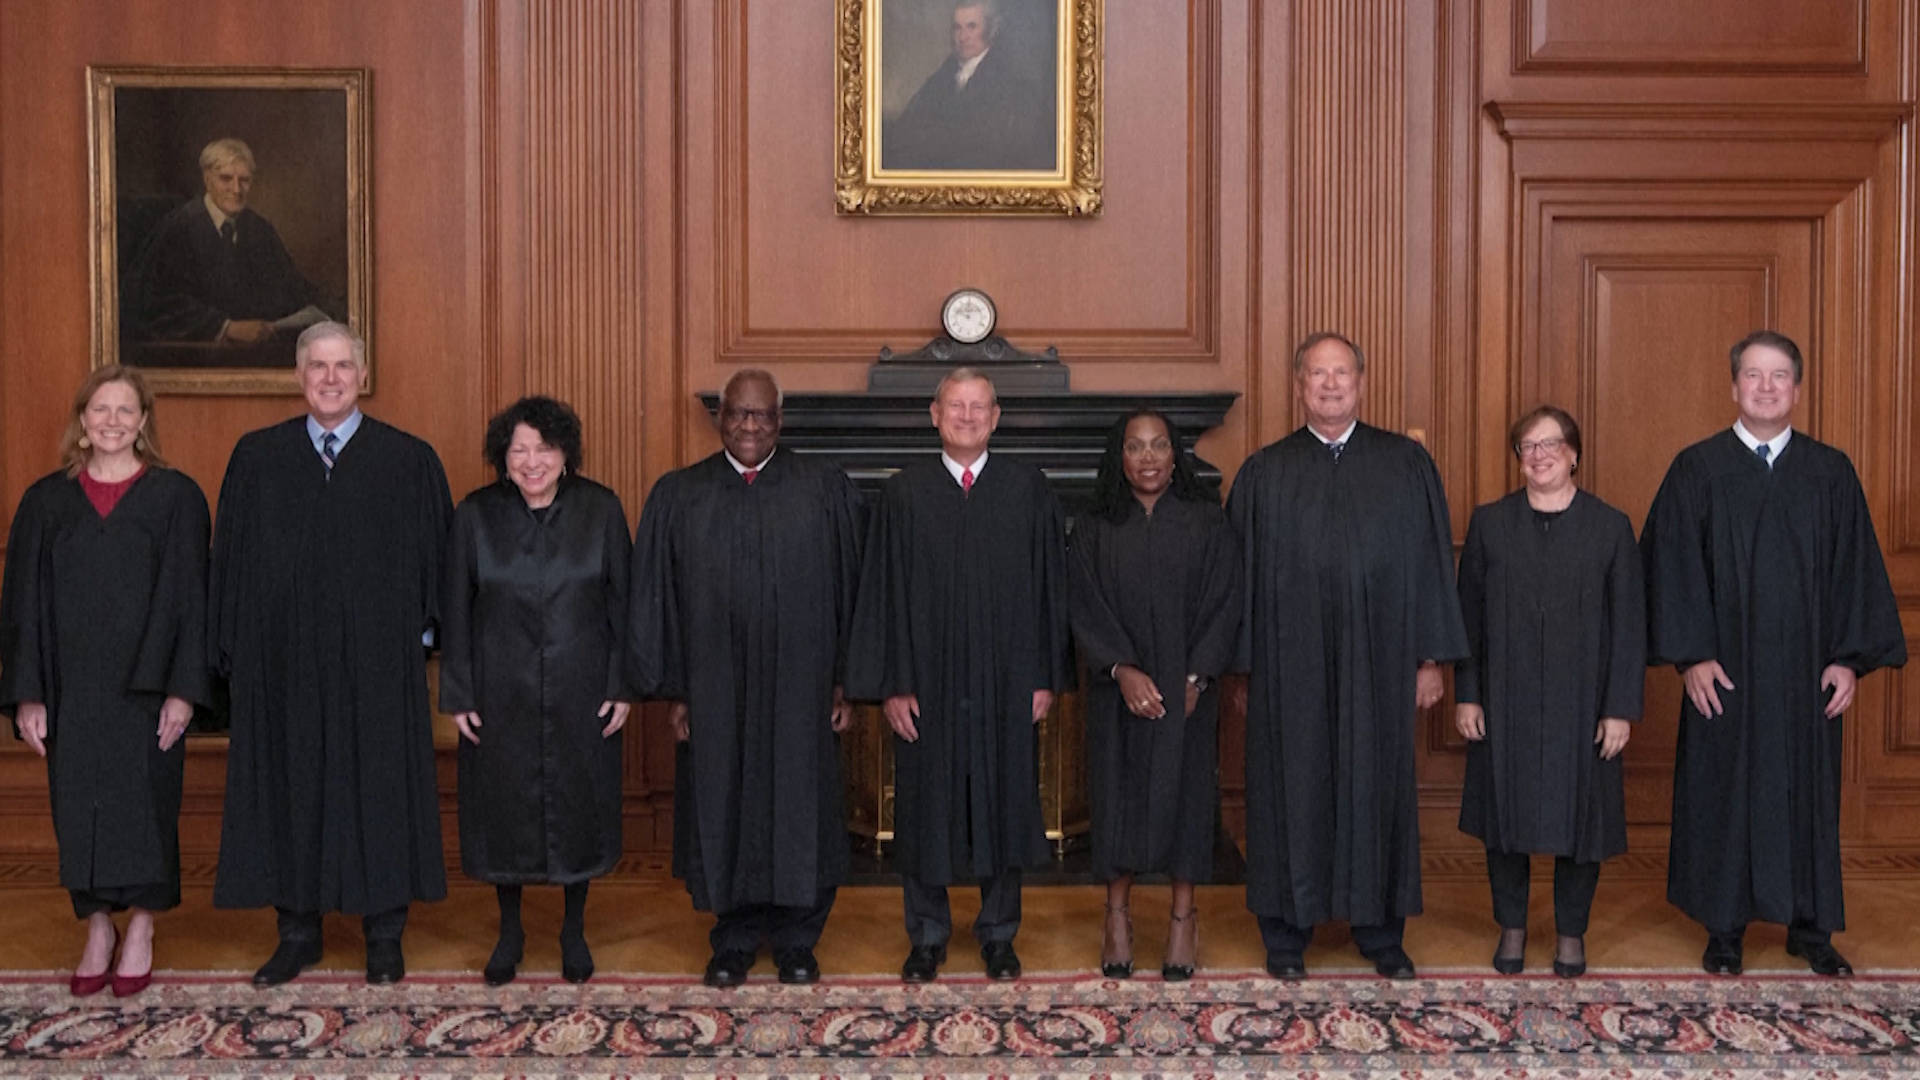 Justice Ketanji Brown Jackson Makes History; SCOTUS Poised to Roll Back Voting Rights & Affirmative Action